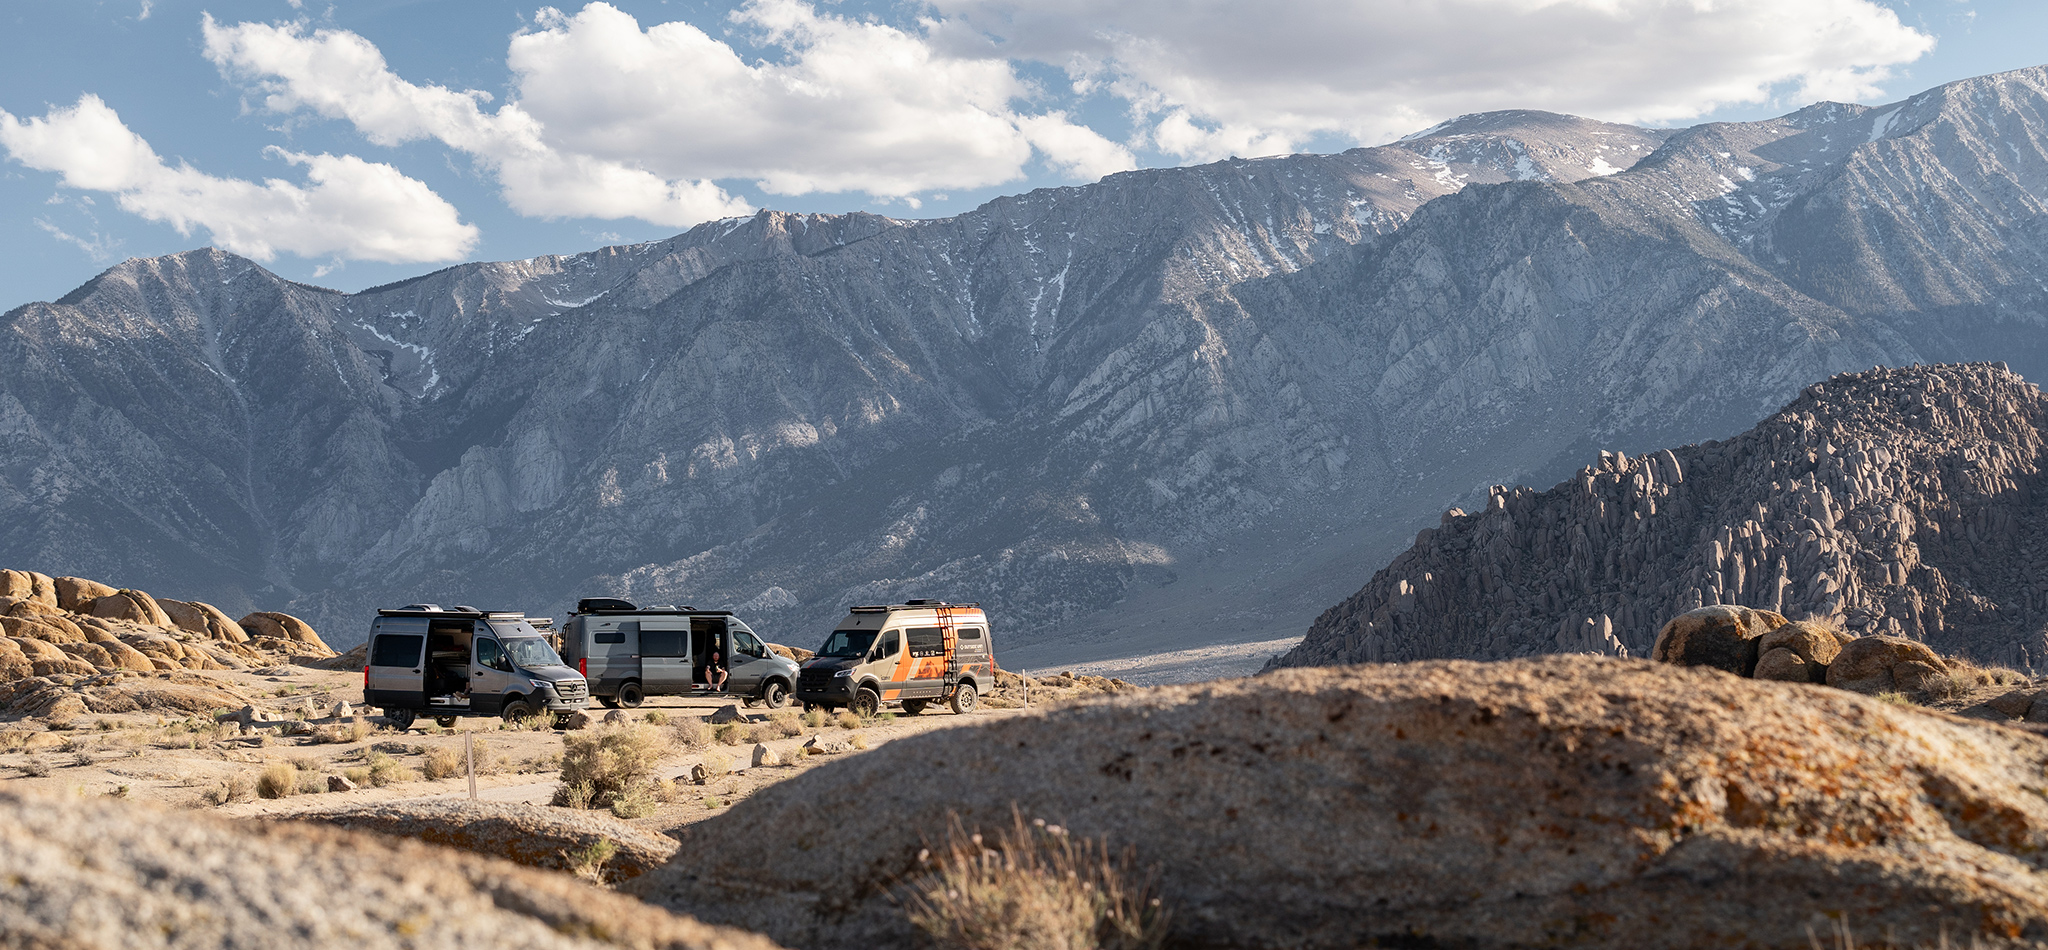 Three custom Sprinter camper vans are circled up at a campsite with desert mountains in the distance.